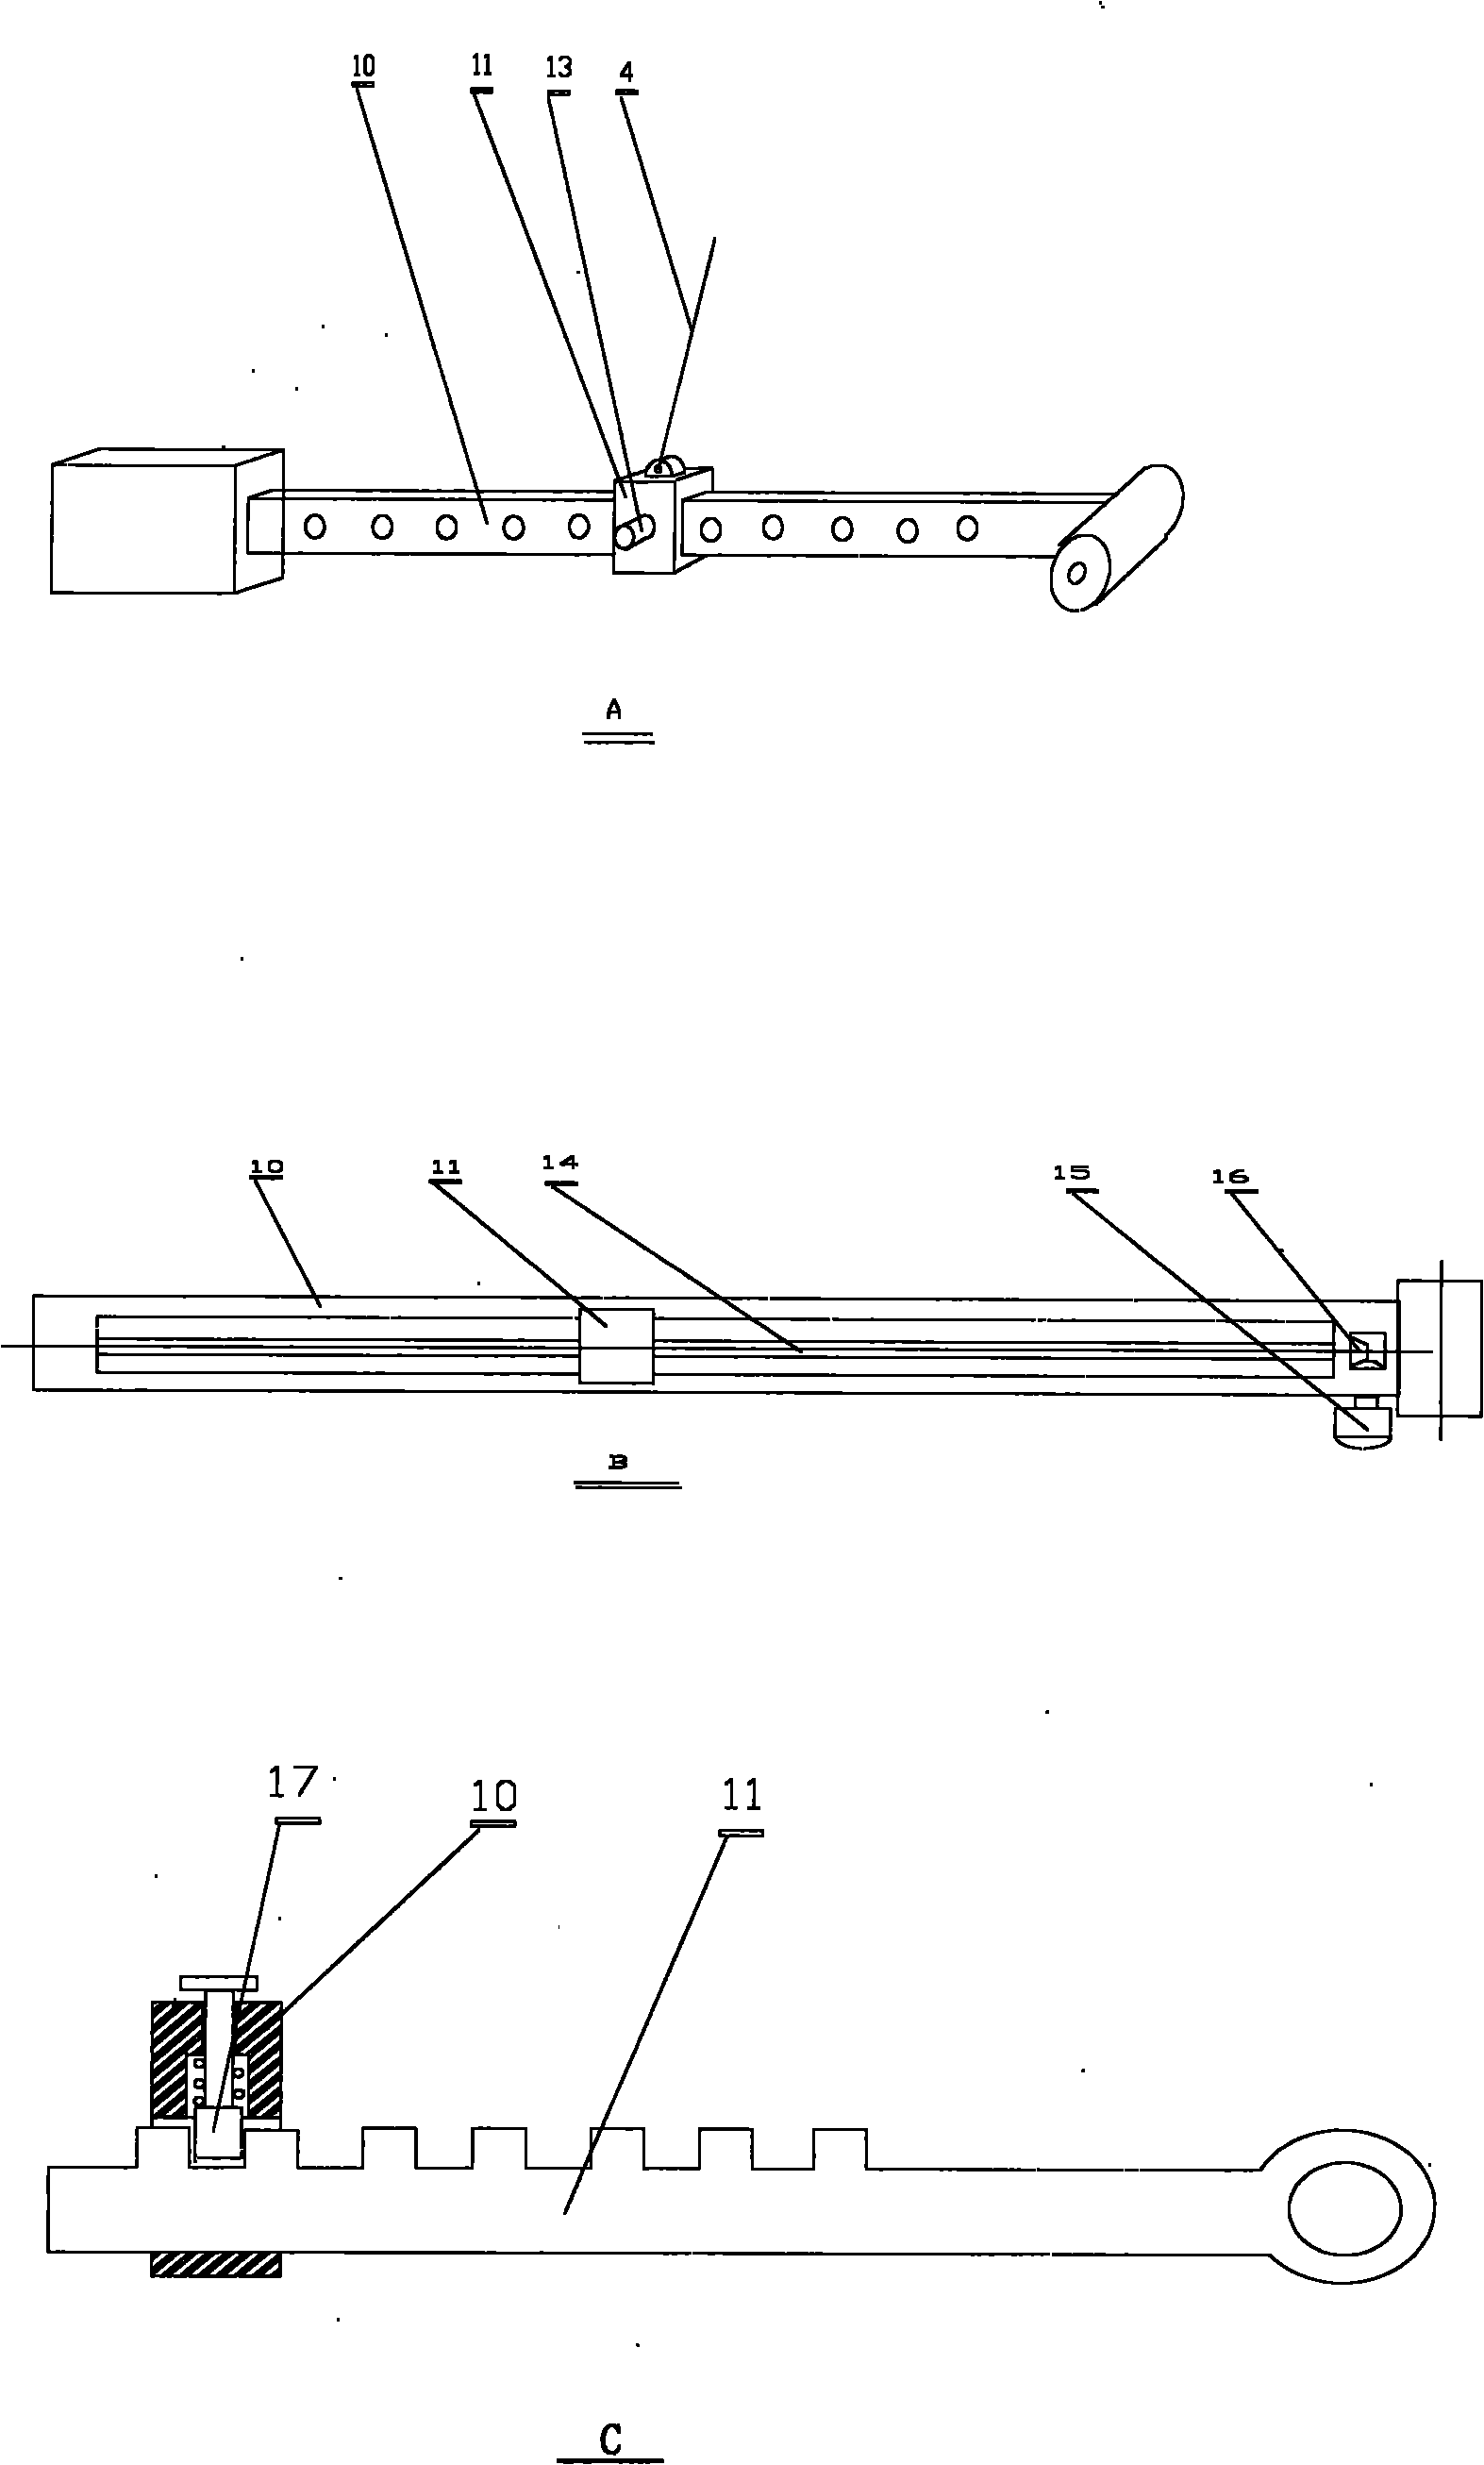 Mechanical mechanism for converting reciprocating motion power into rotary power